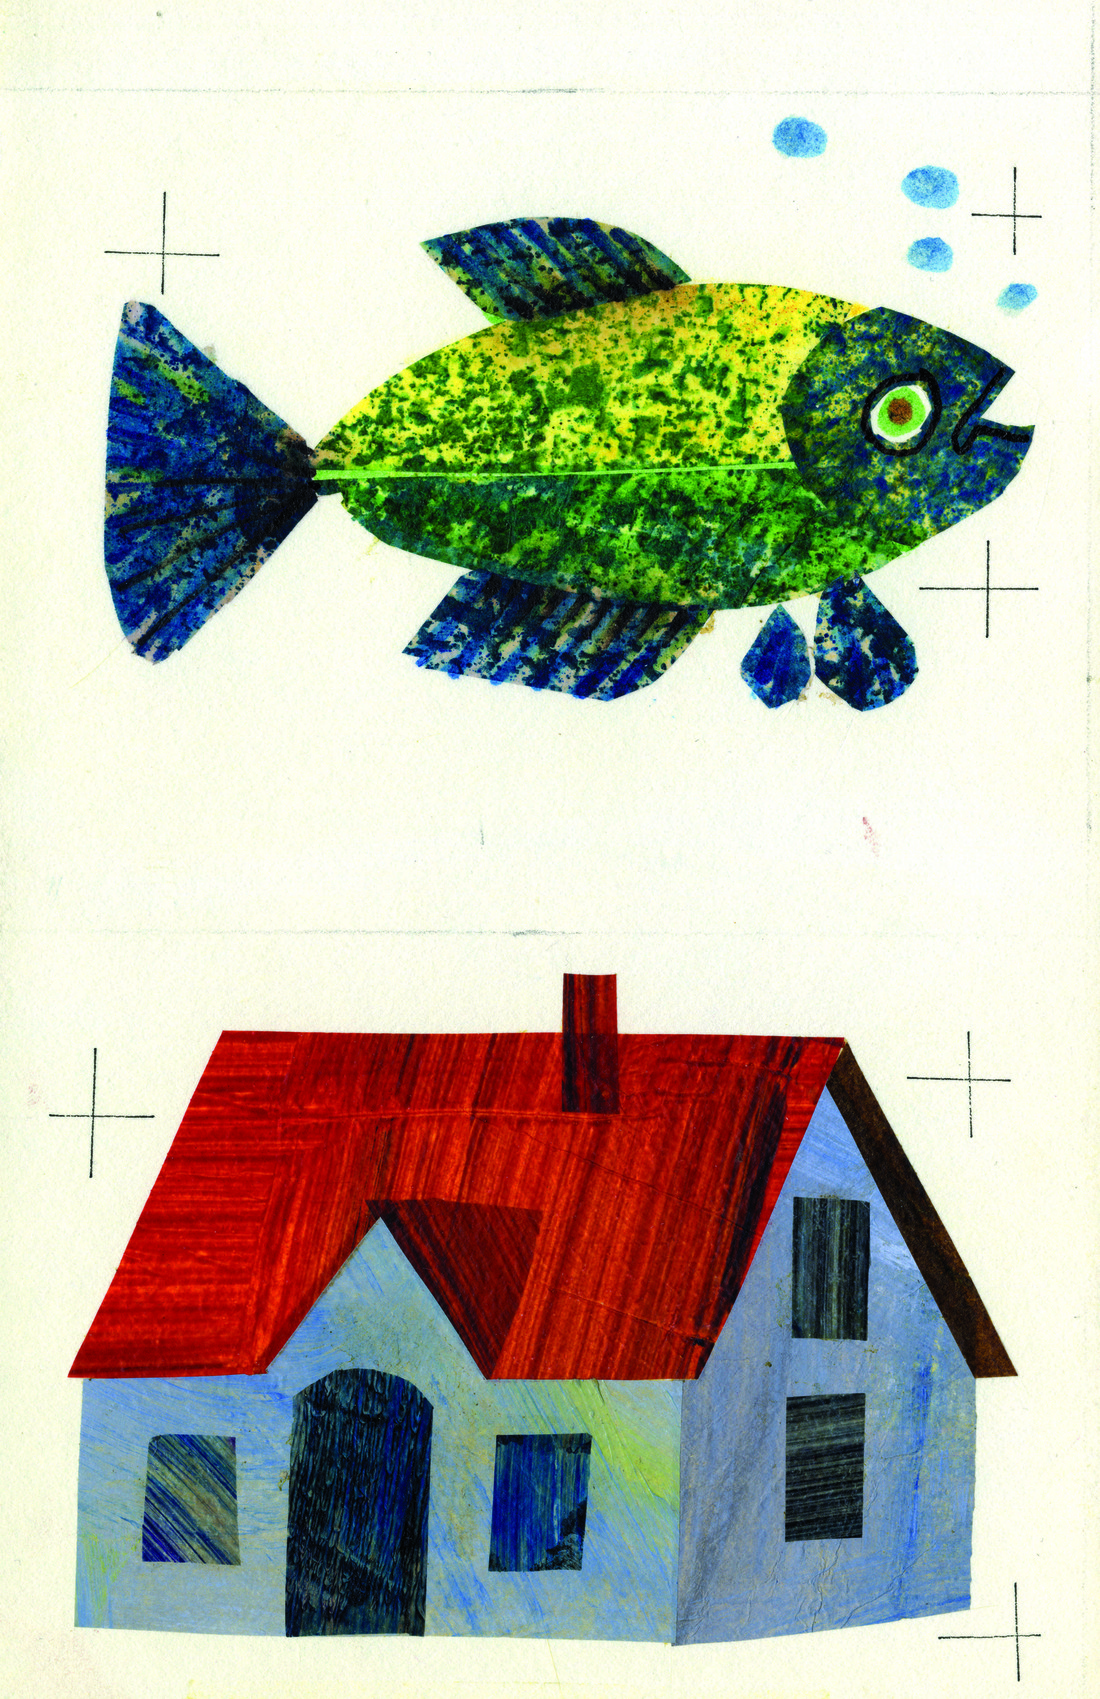 Image of a fish on top and of a house on the bottom